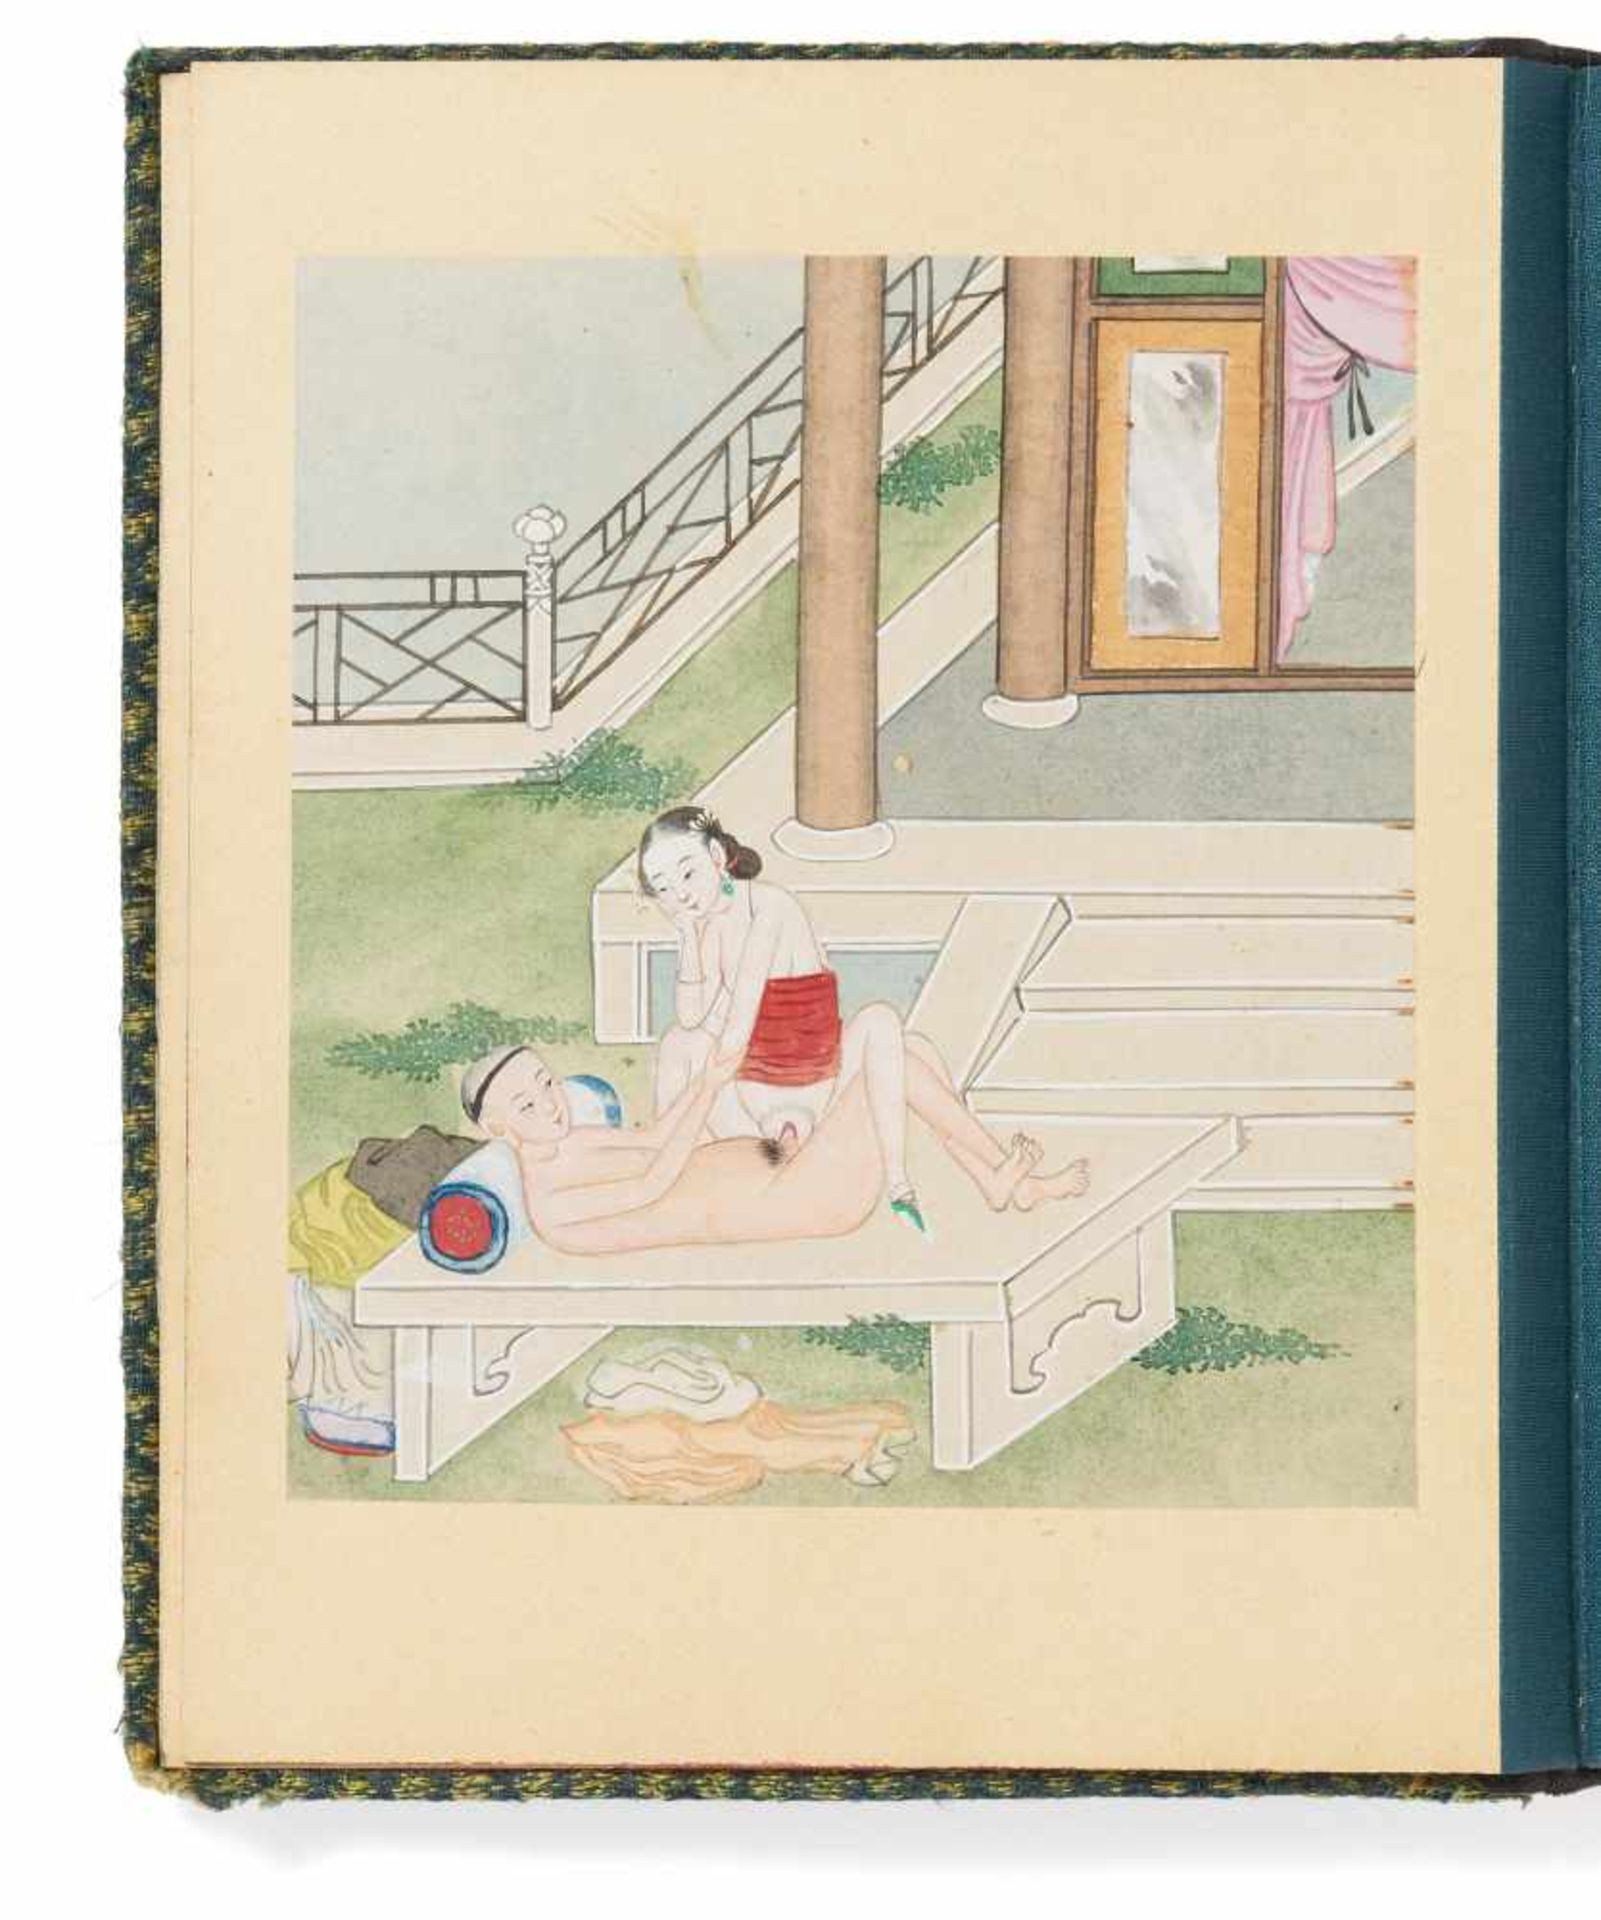 ALBUM WITH TWELVE EROTIC PAINTINGS. China. Qing dynasty. 18th/19th c. Ink and pigments on paper. The